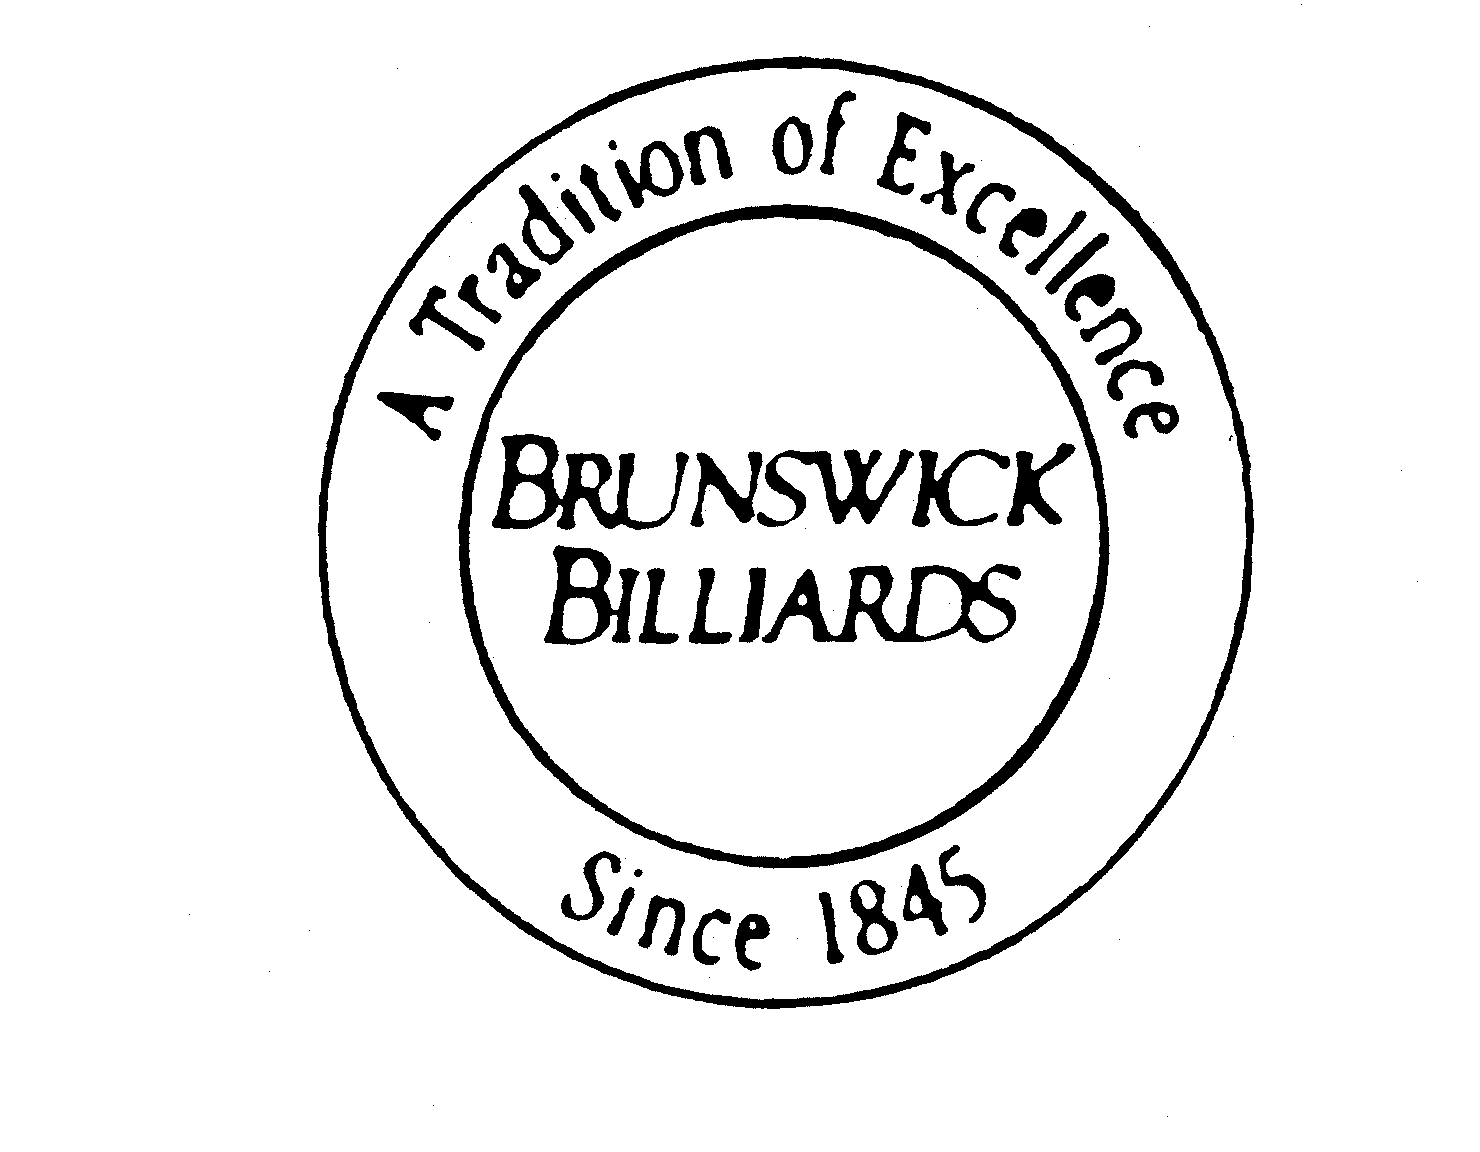  A TRADITION OF EXCELLENCE BRUNSWICK BILLIARDS SINCE 1845